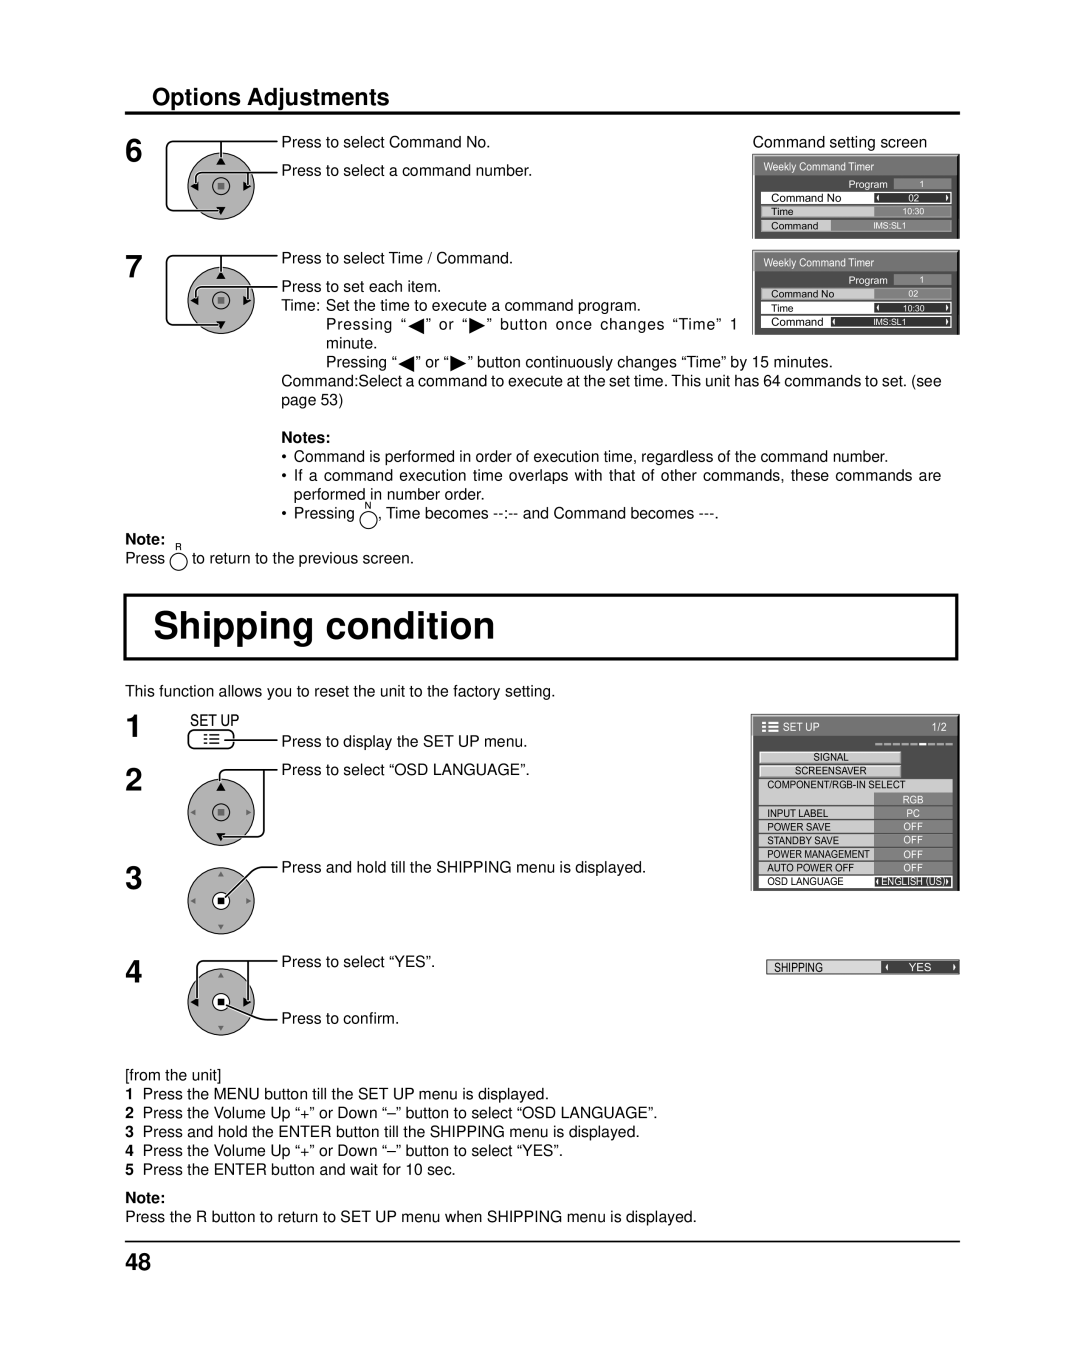 Panasonic TH-65PF11UK, TH-58PF11UK, TH-50PF11UK, TH-42PF11UK manual Shipping condition, Options Adjustments 